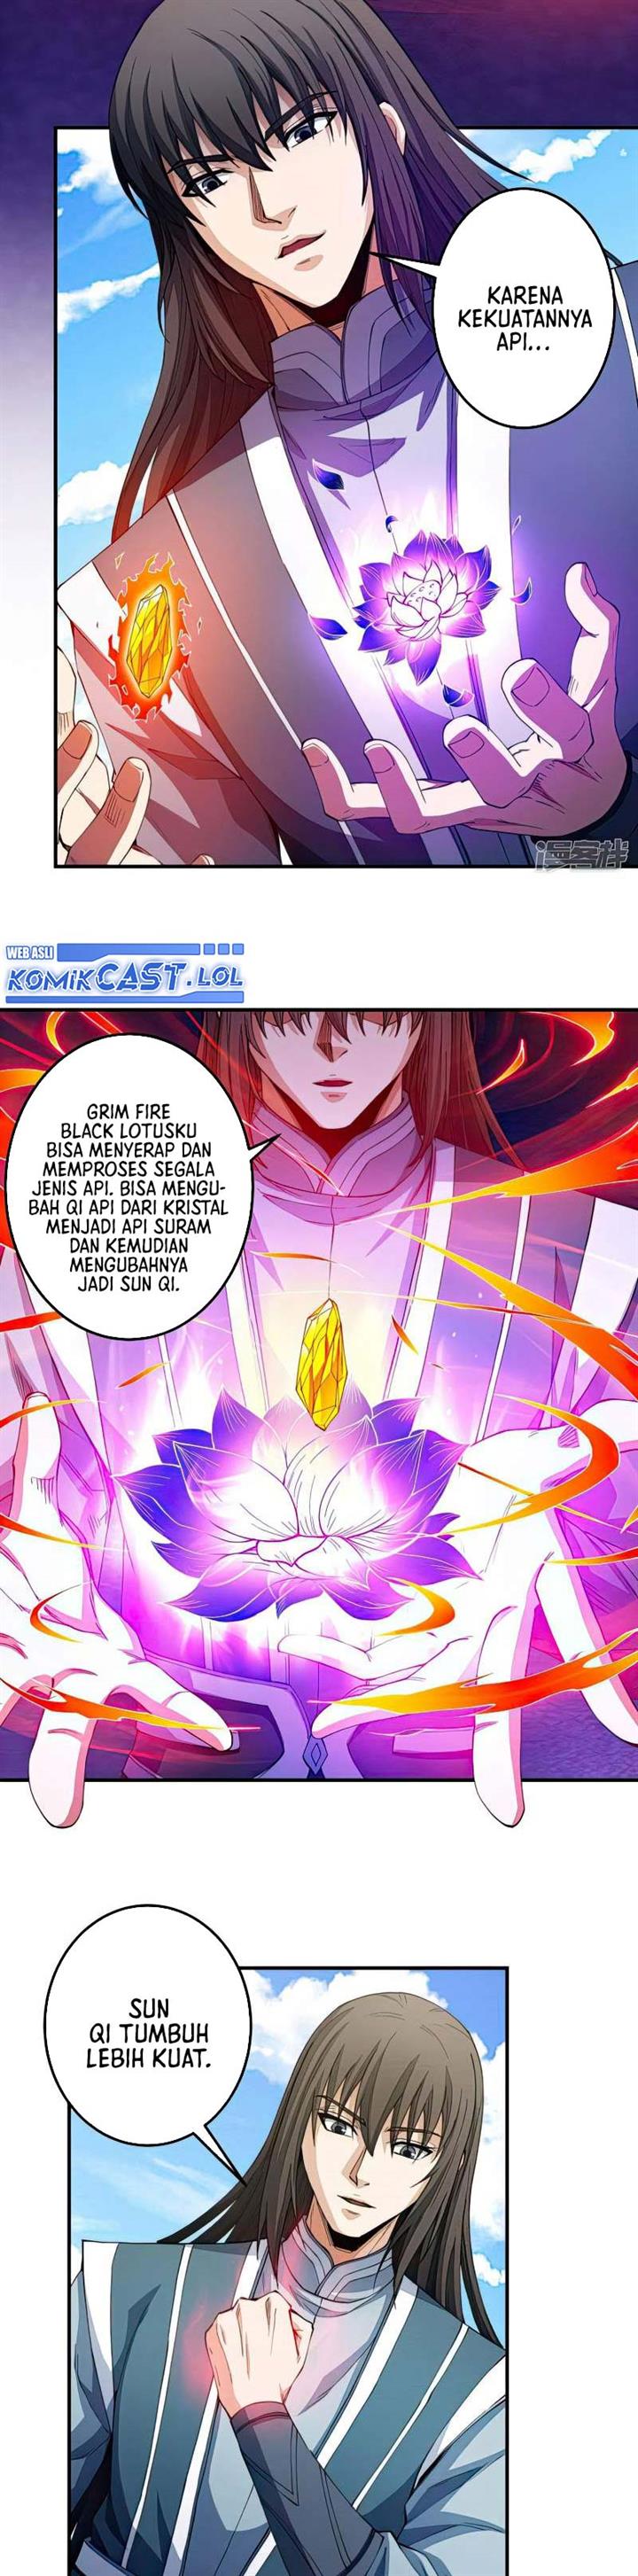 God of Martial Arts Chapter 589